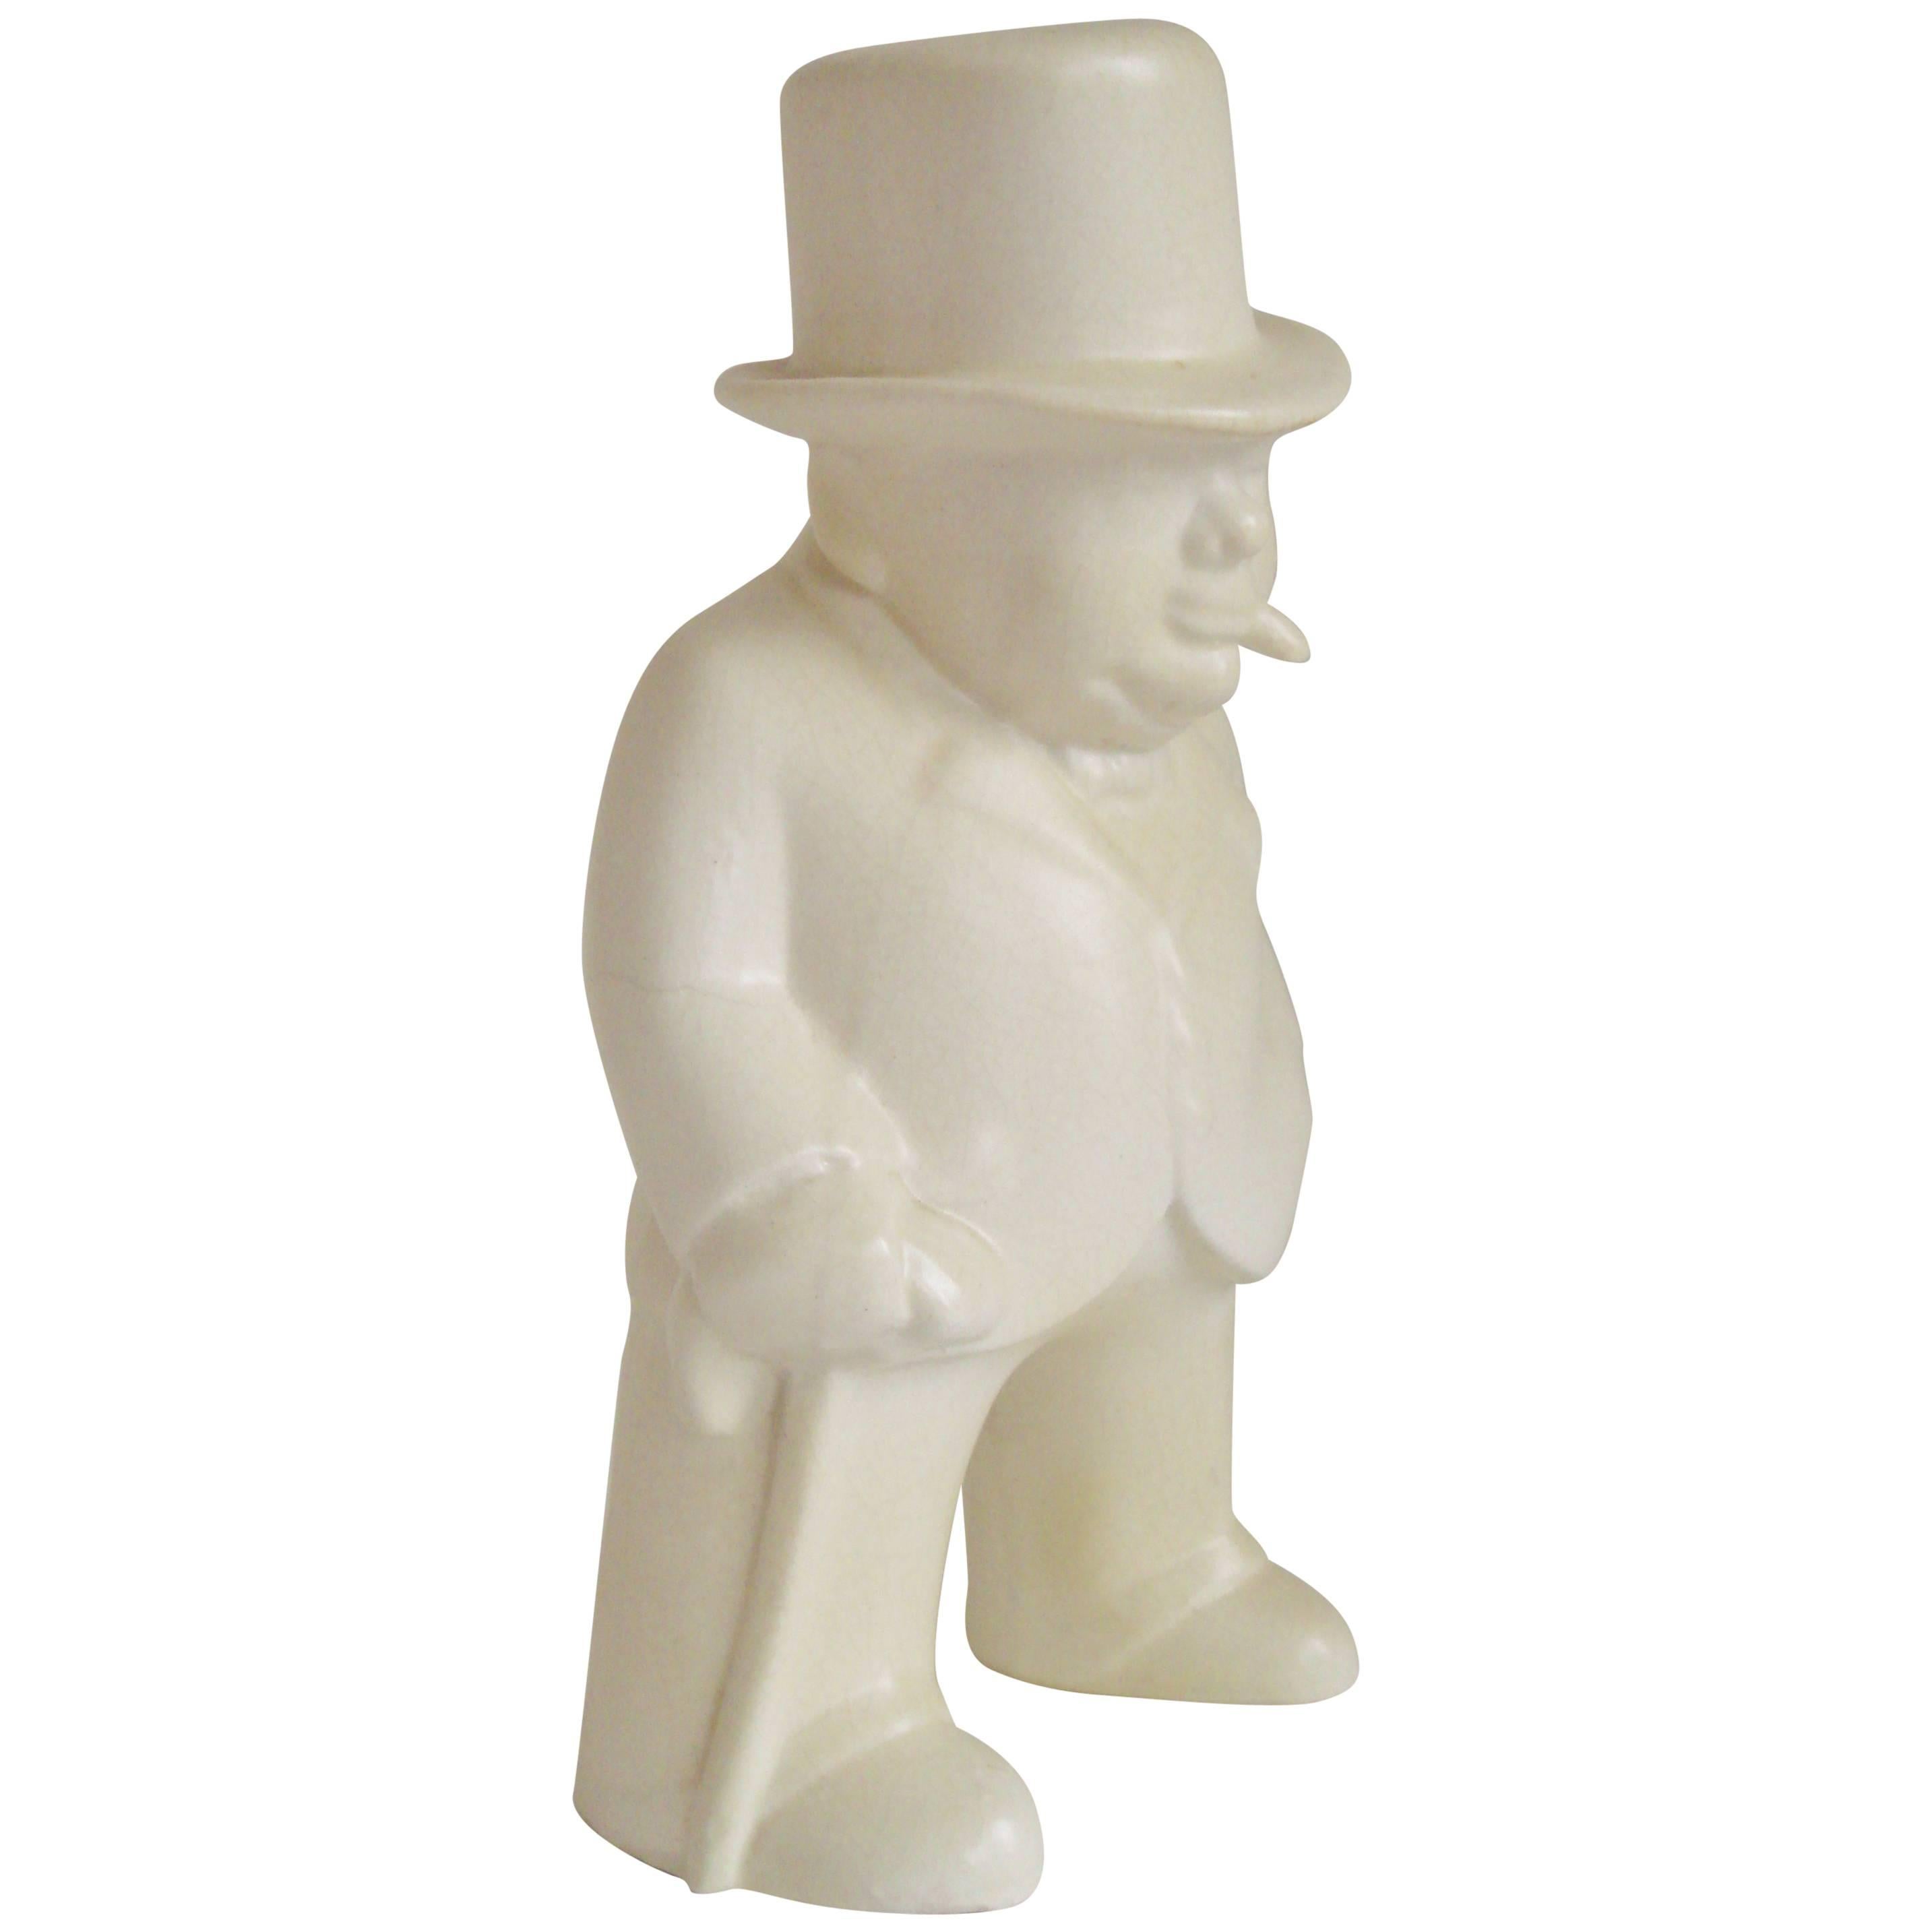 English Art Deco Ceramic Winston Churchill, Our Gang Figure by the Bovey Pottery